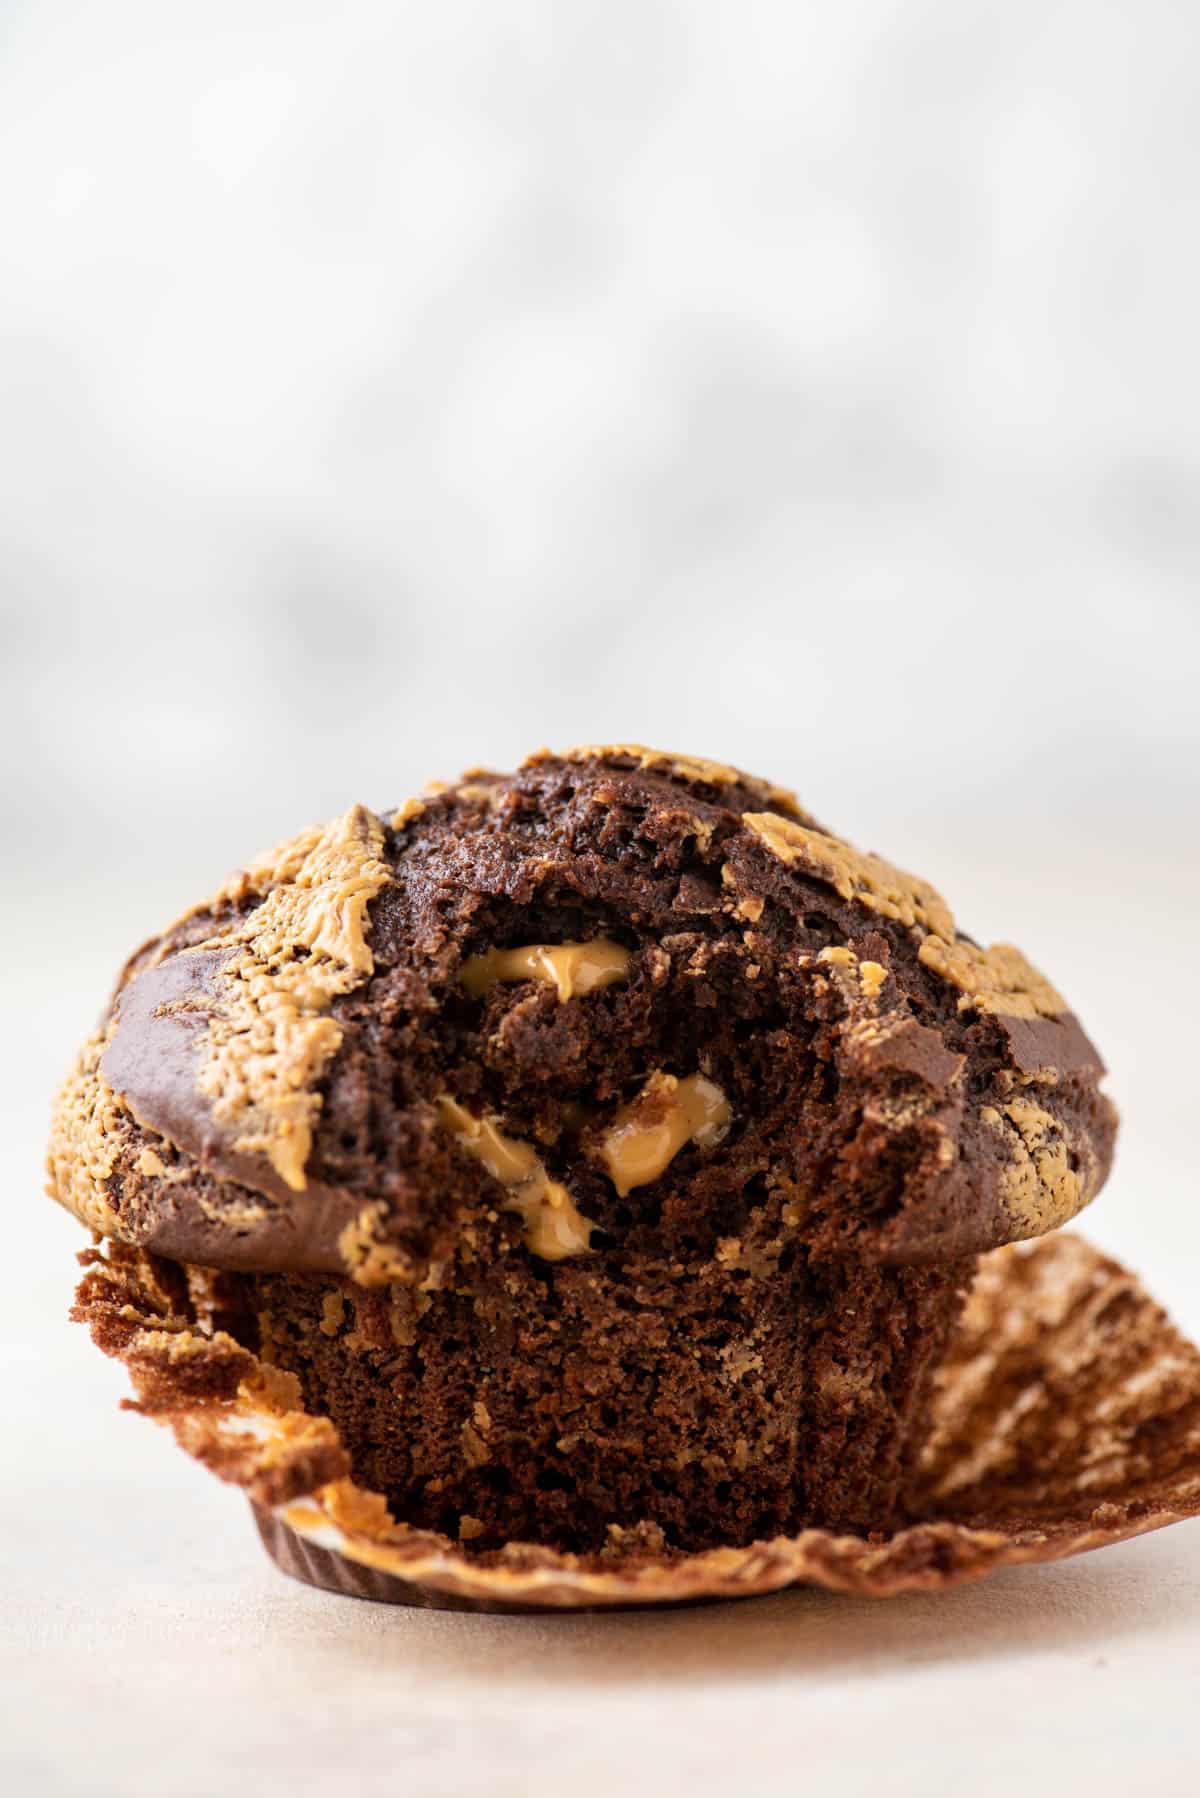 one chocolate peanut butter muffin with the muffin liner peeled partially off and a bite taken out